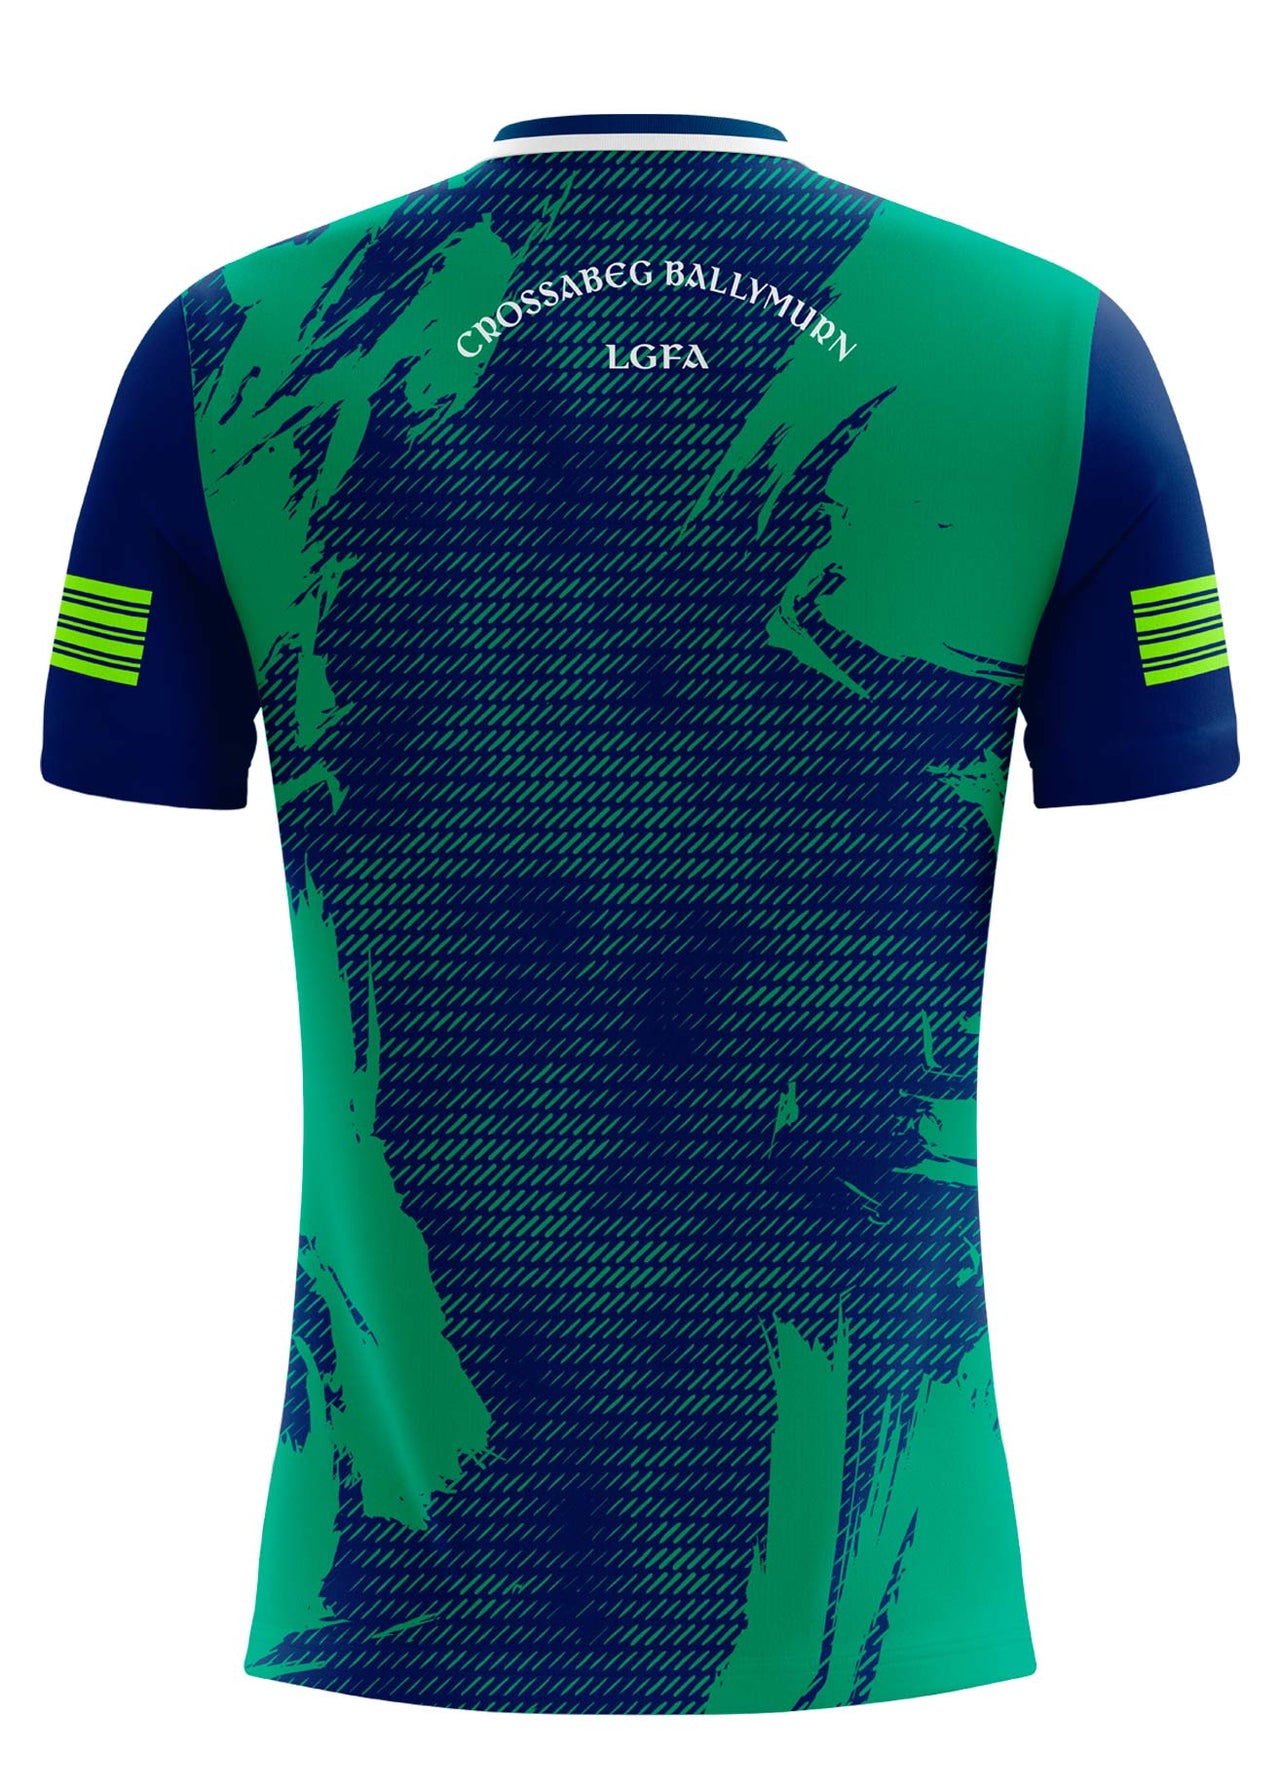 Crossabeg Ballymurn LGFC Boa Style Neon Jersey Player Fit Adult